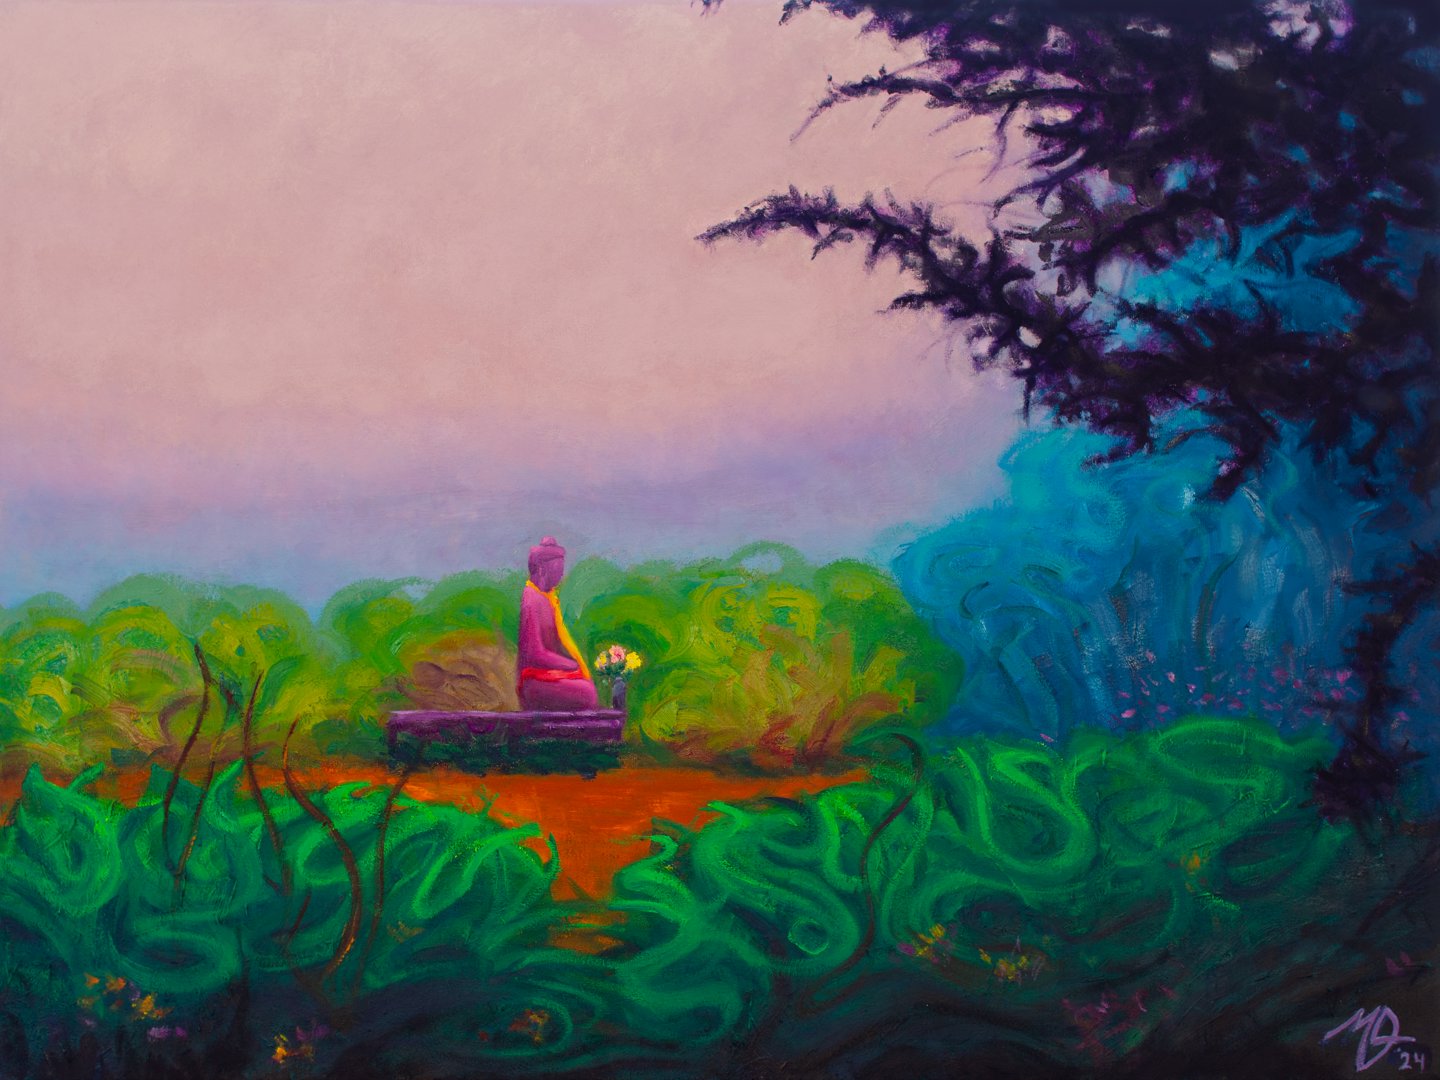 A vibrant impressionistic painting of a Buddha statue in a misty field.